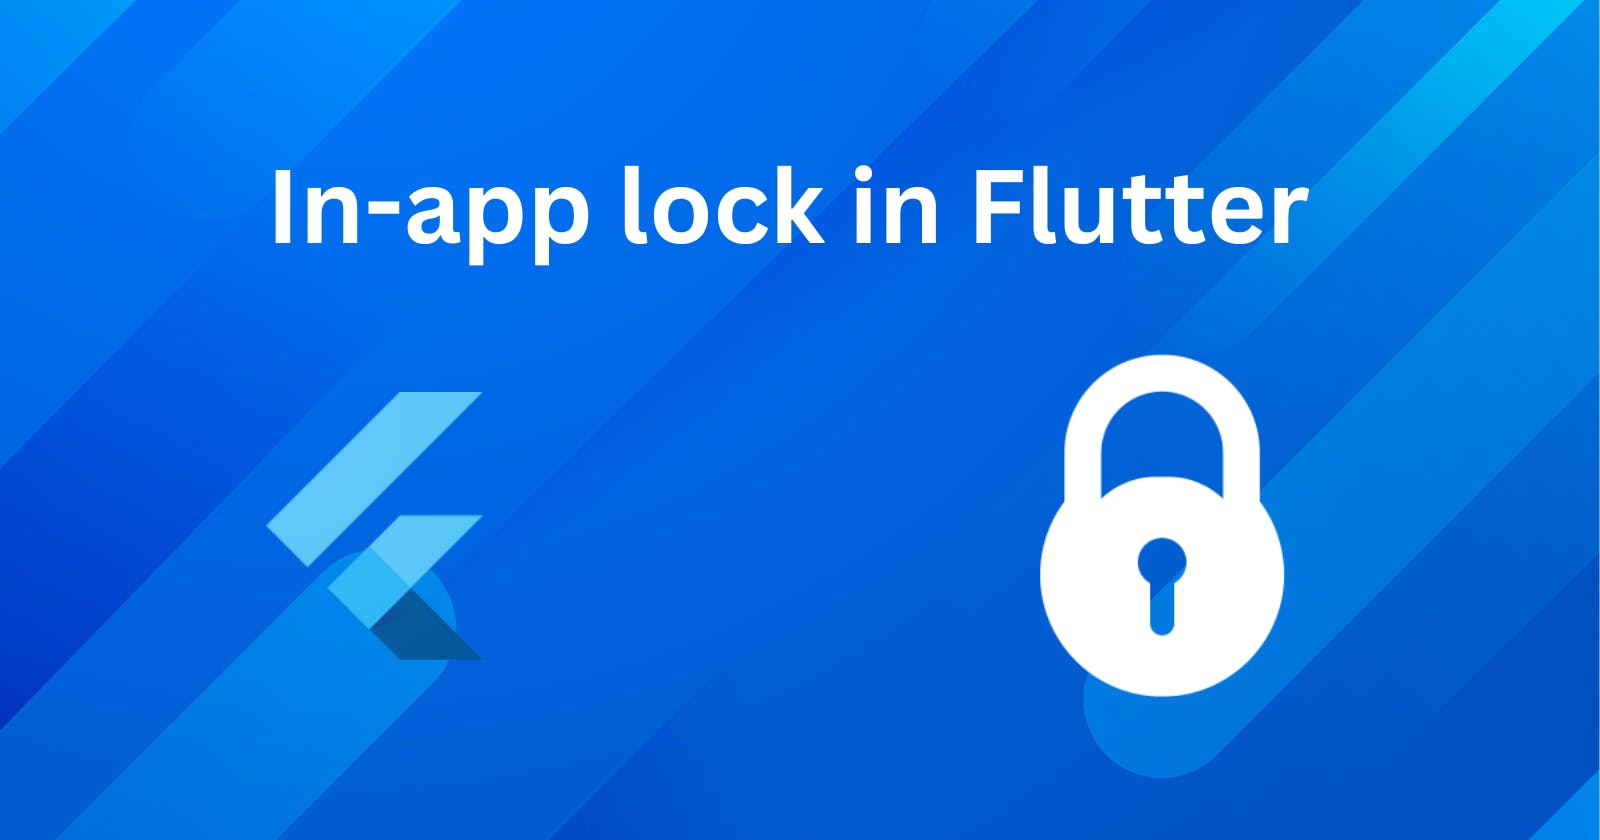 How to implement in-app lock in Flutter Applications